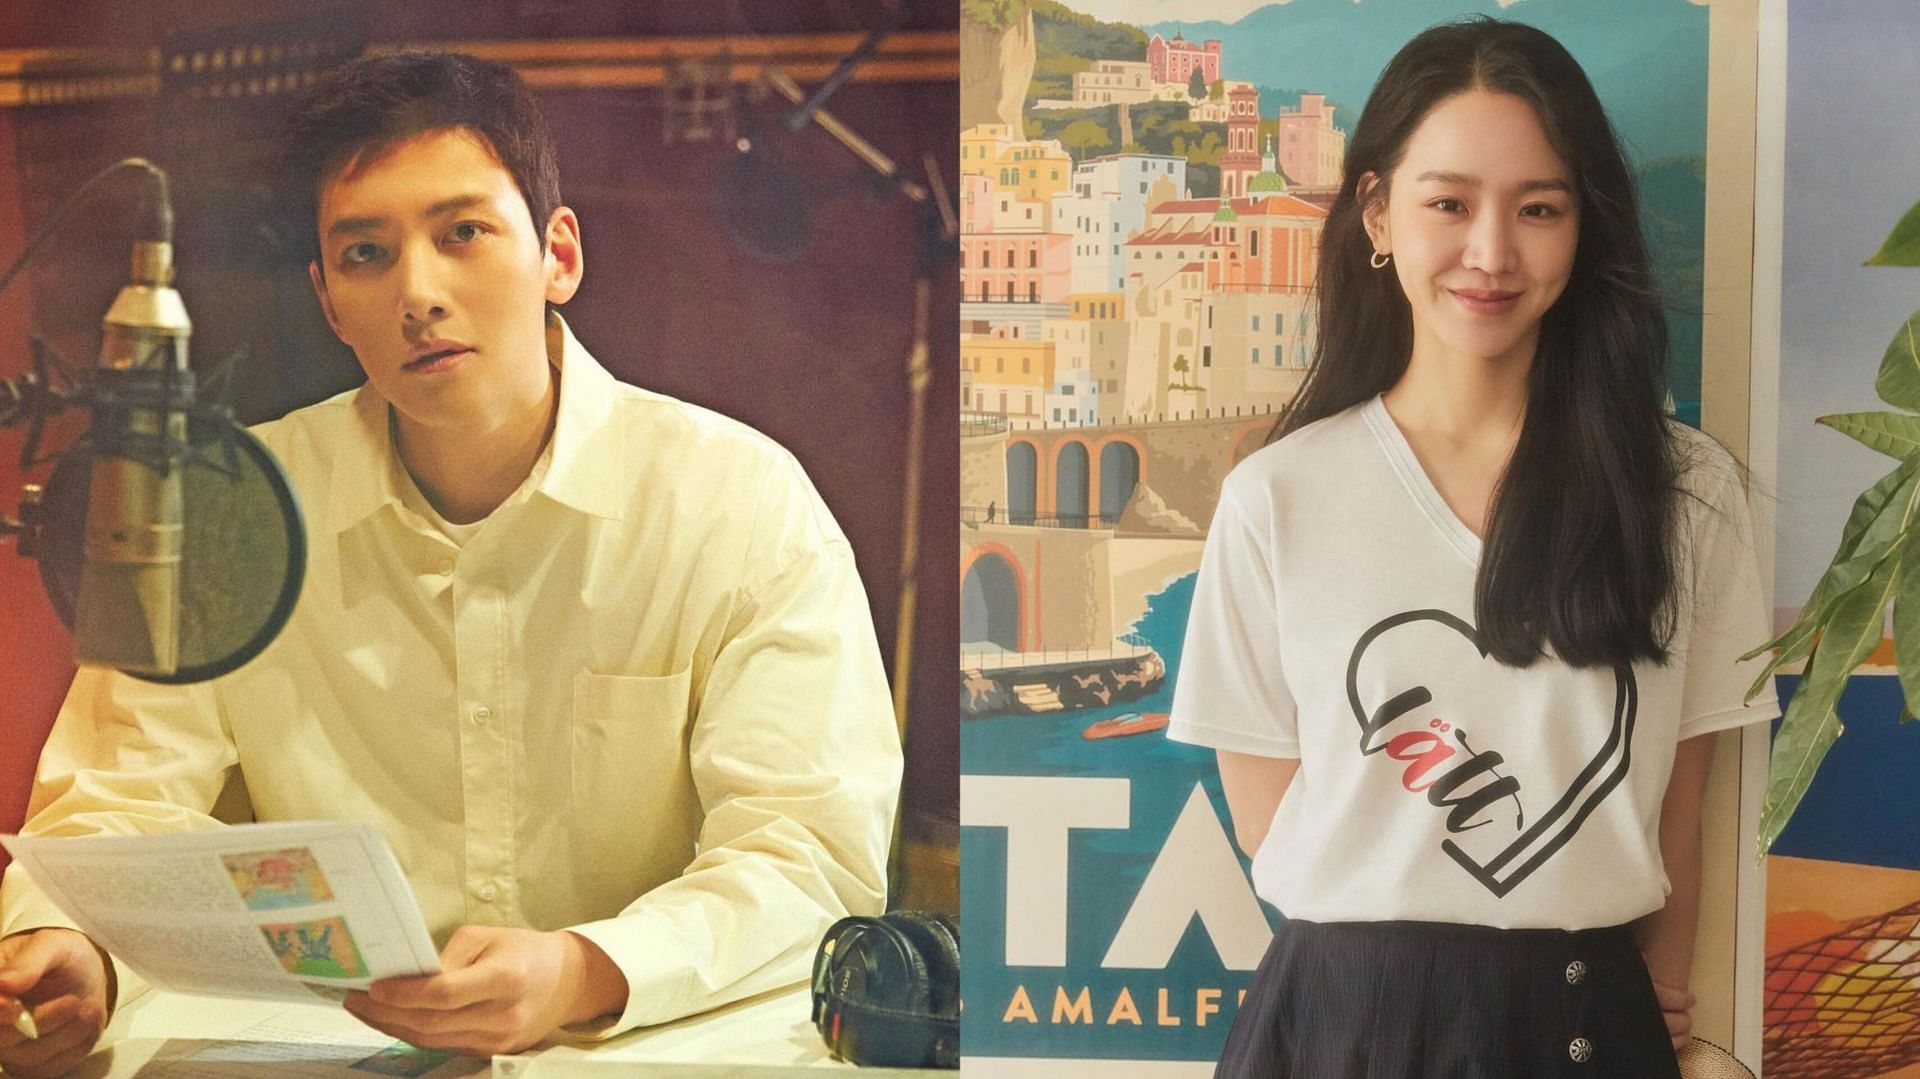 Featuring Ji Chang-wook and Shin Hye-sun (Image via Glorious Entertainment and YNK Entertainment)